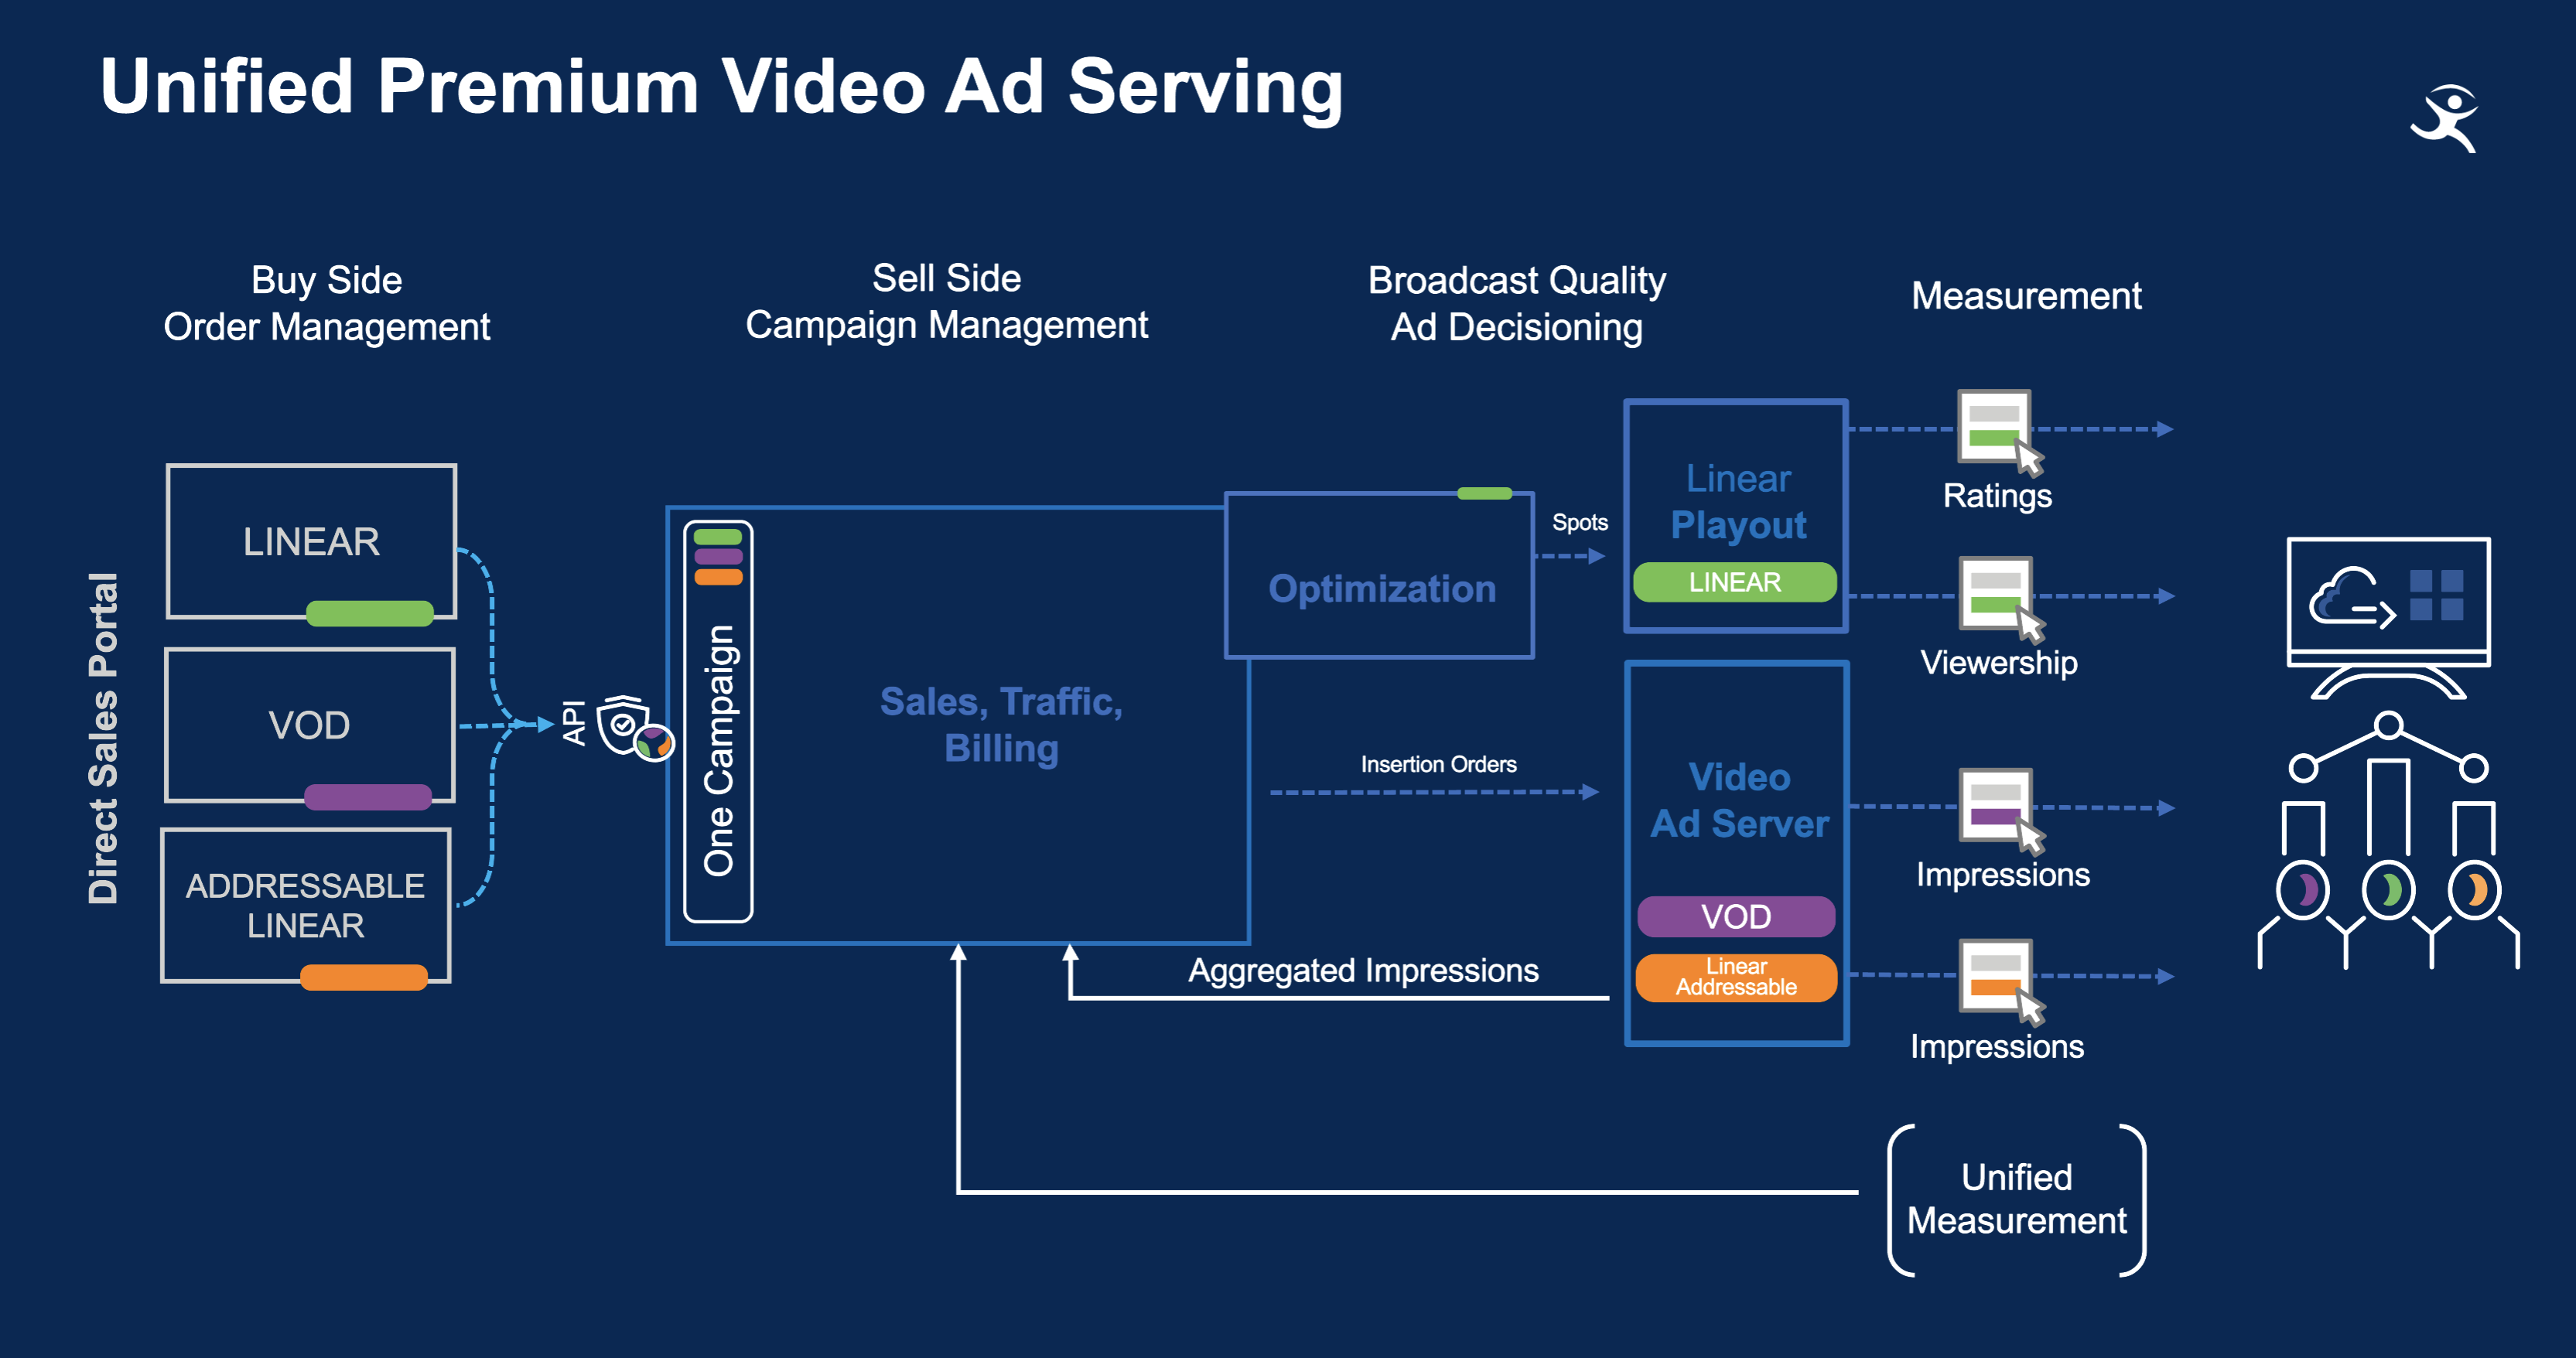 Unified Premium Video Ad Serving